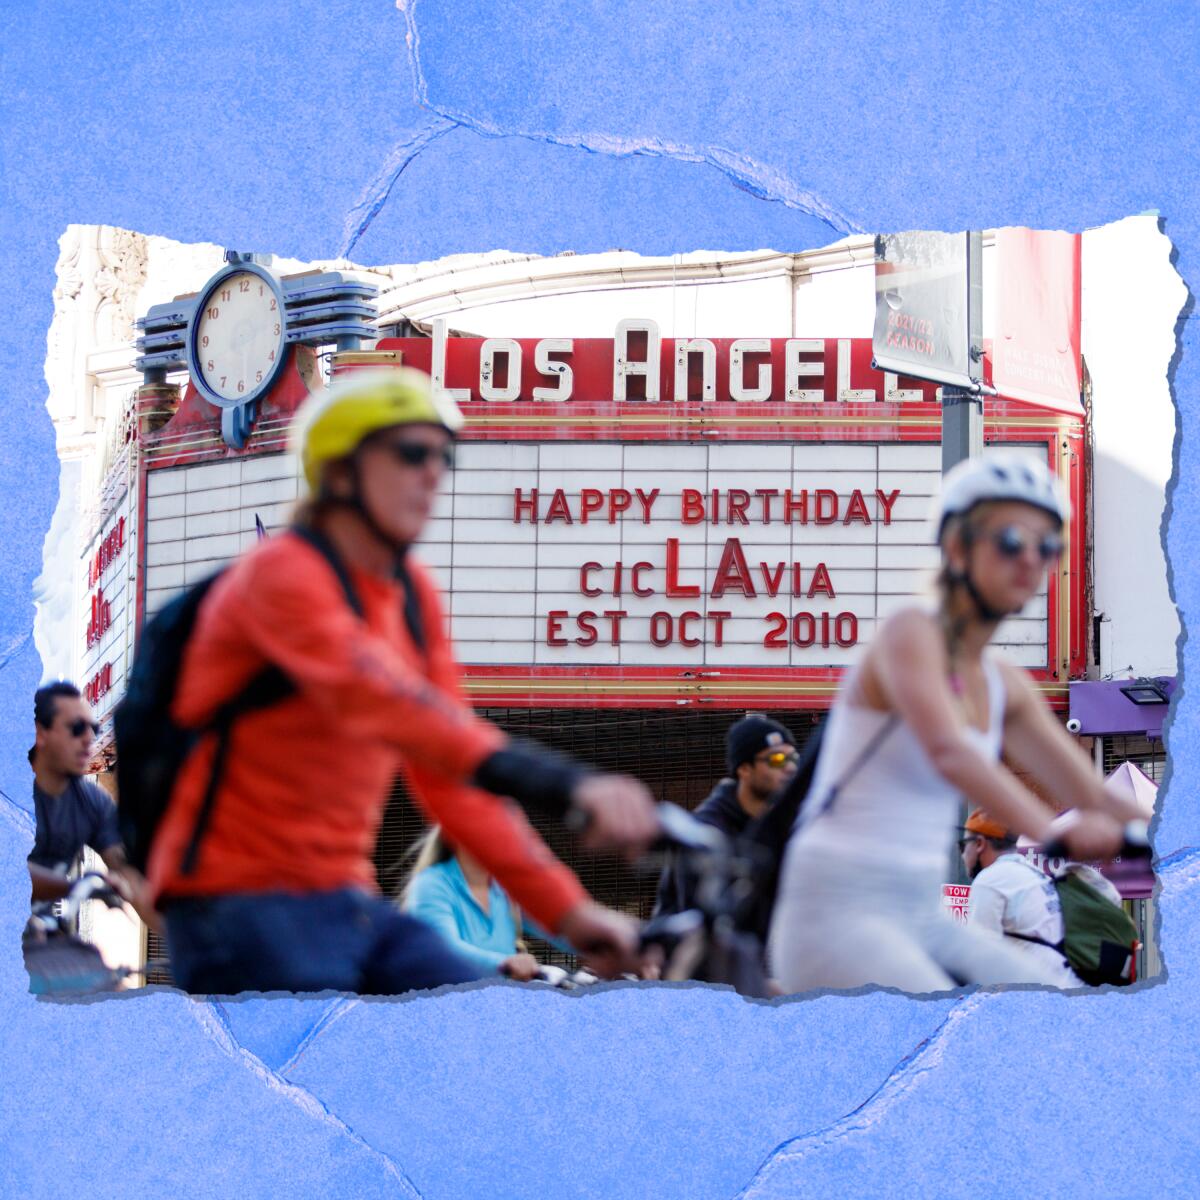 Two people on bikes with helmets pass a cinema marque that reads: "Happy birthday CicLAvia, established October 2010."